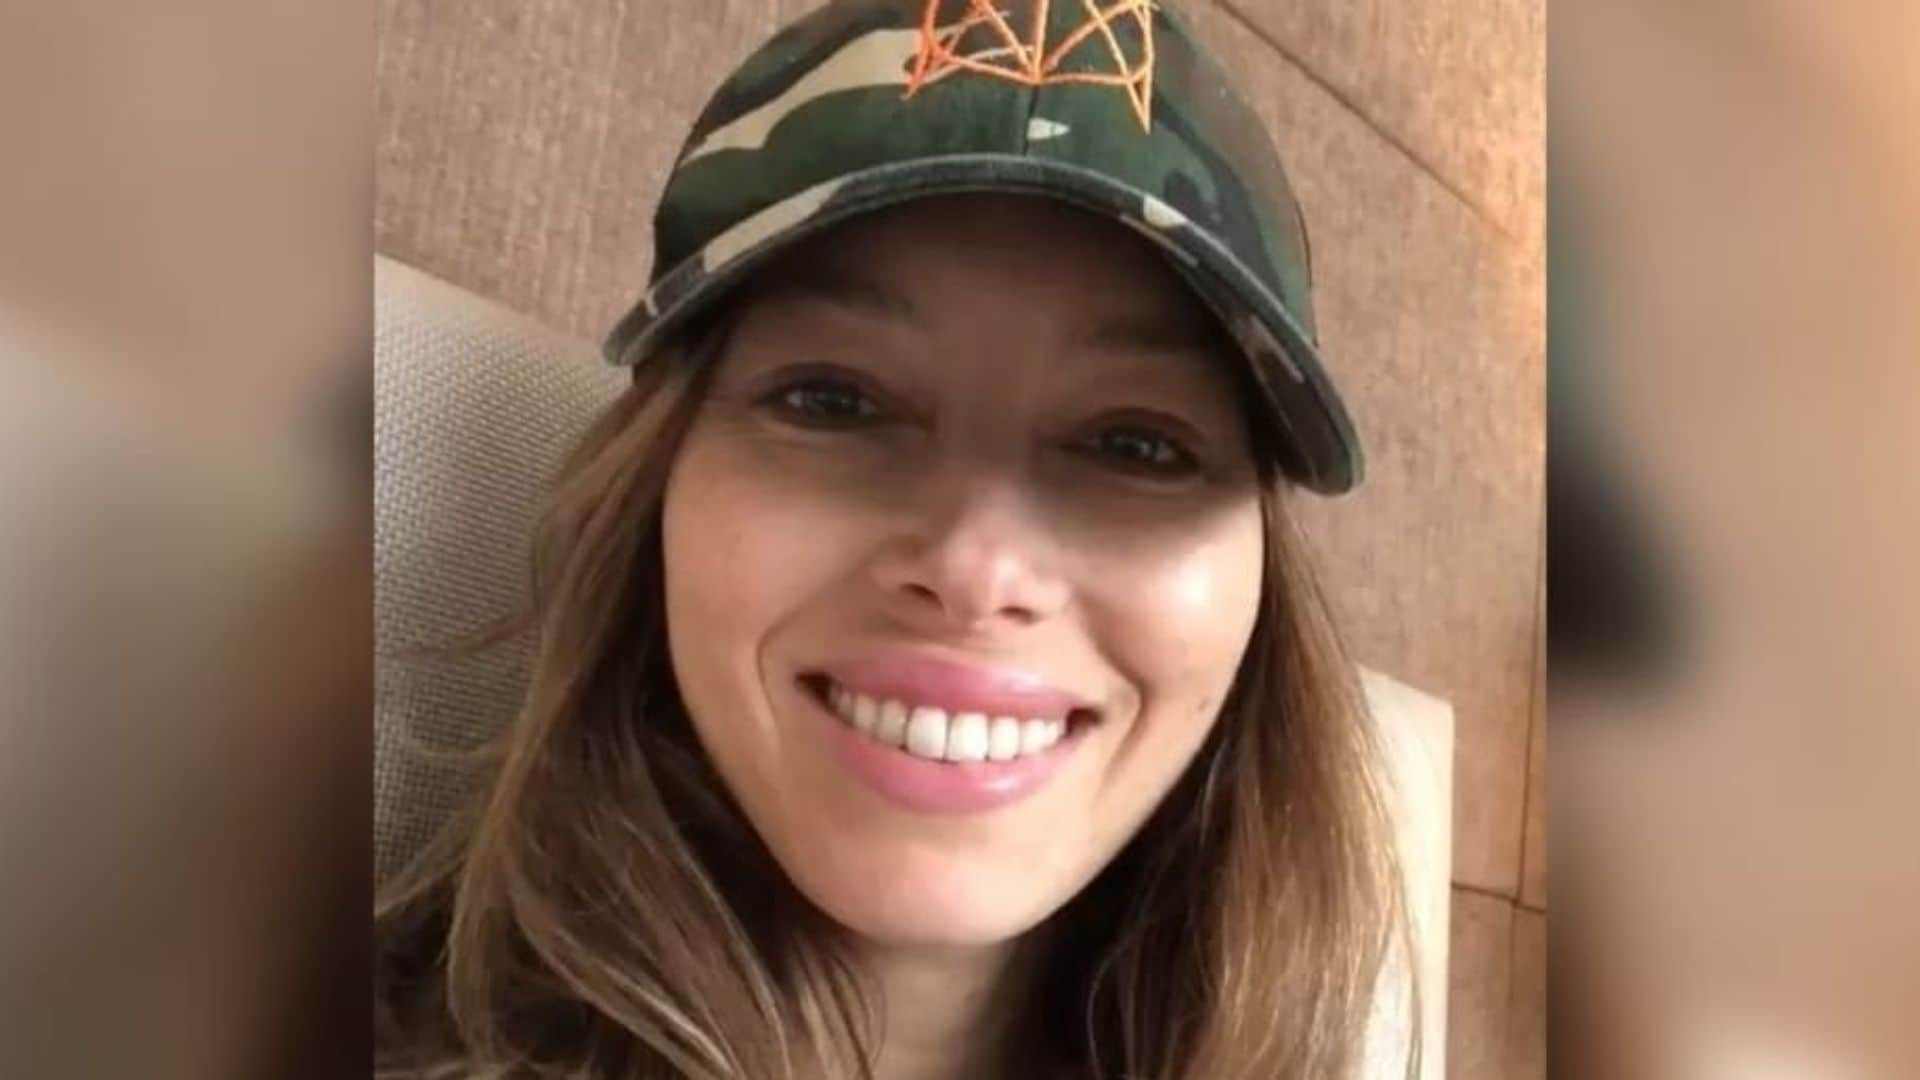 Jessica Biel gets emotional on last day of Justin Timberlake's tour